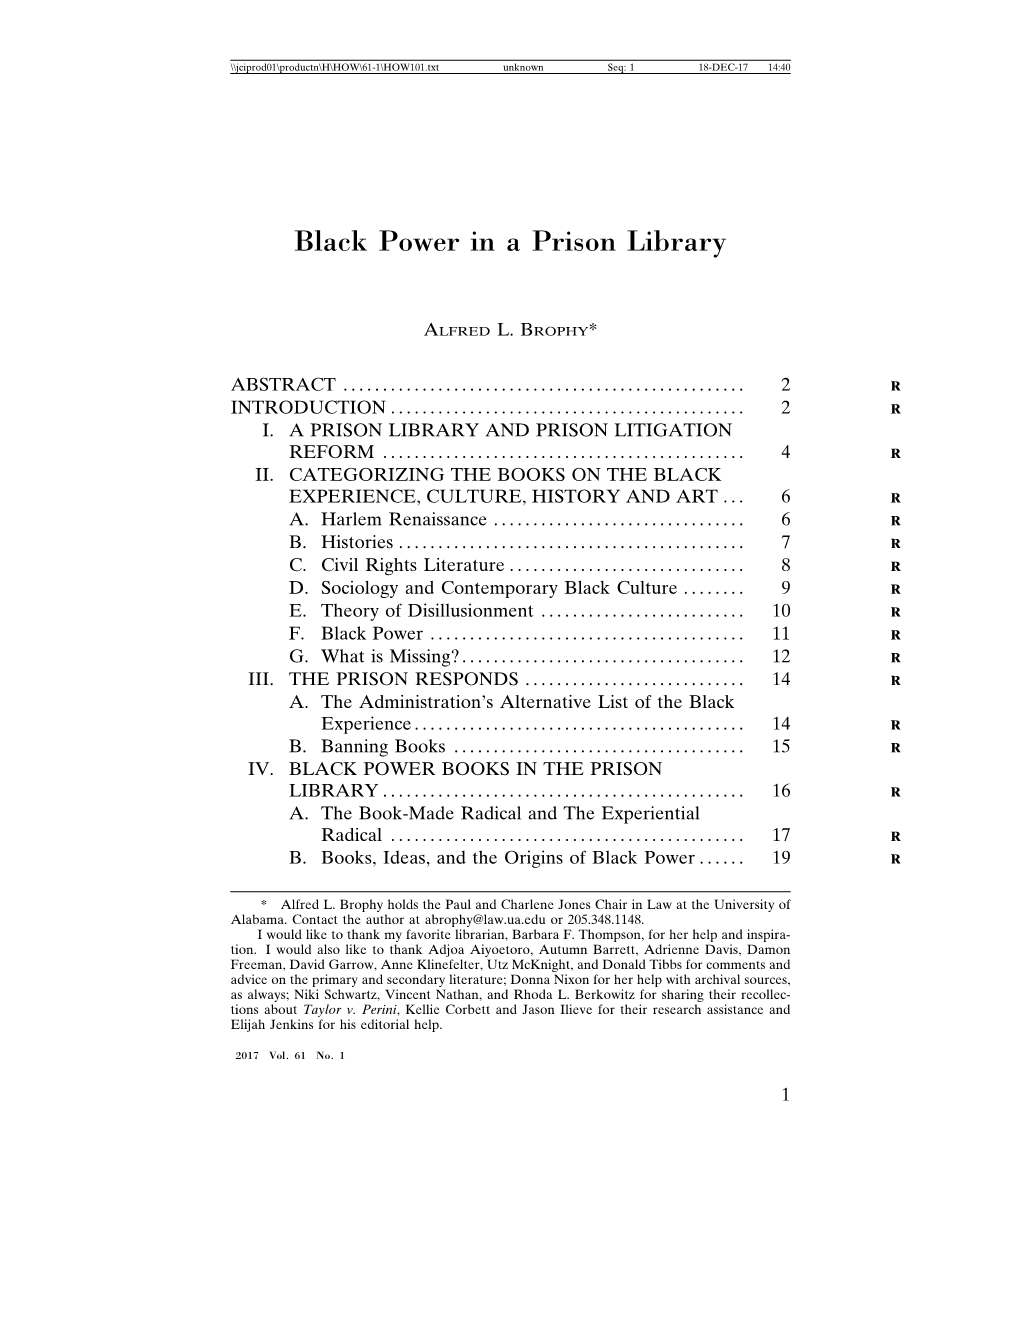 Black Power in a Prison Library